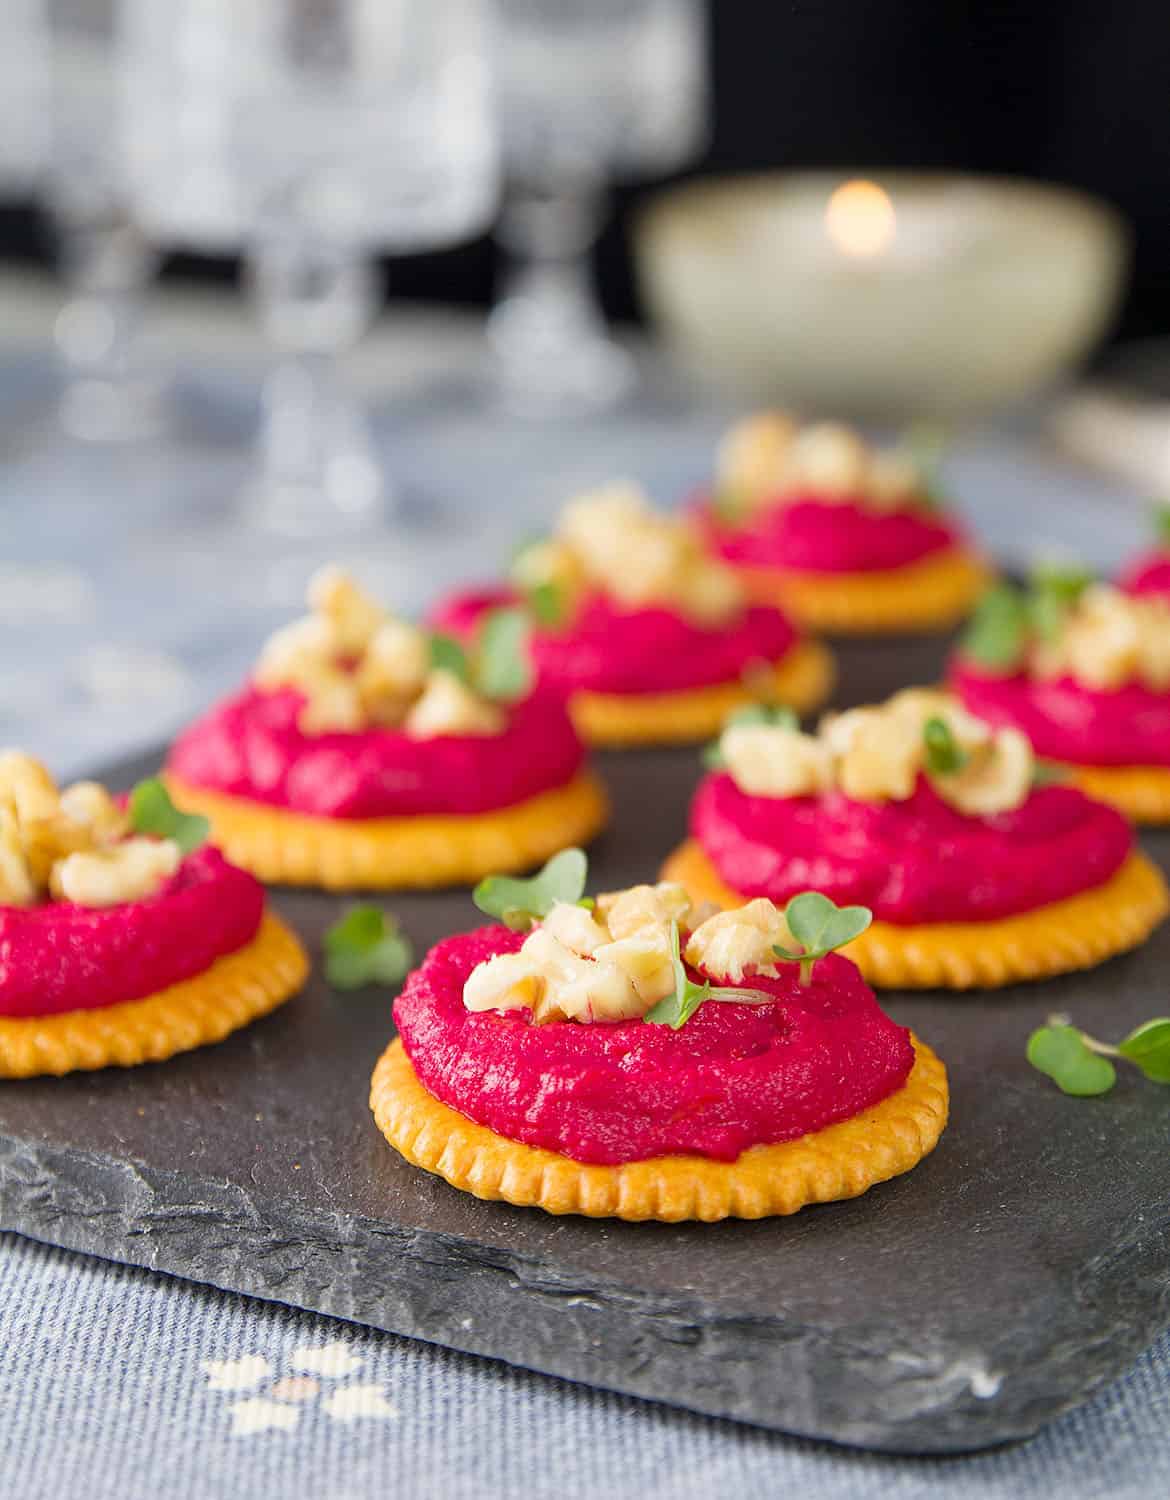 Small round crackers topped with beetroot hummus and chopped walnuts over a black background.